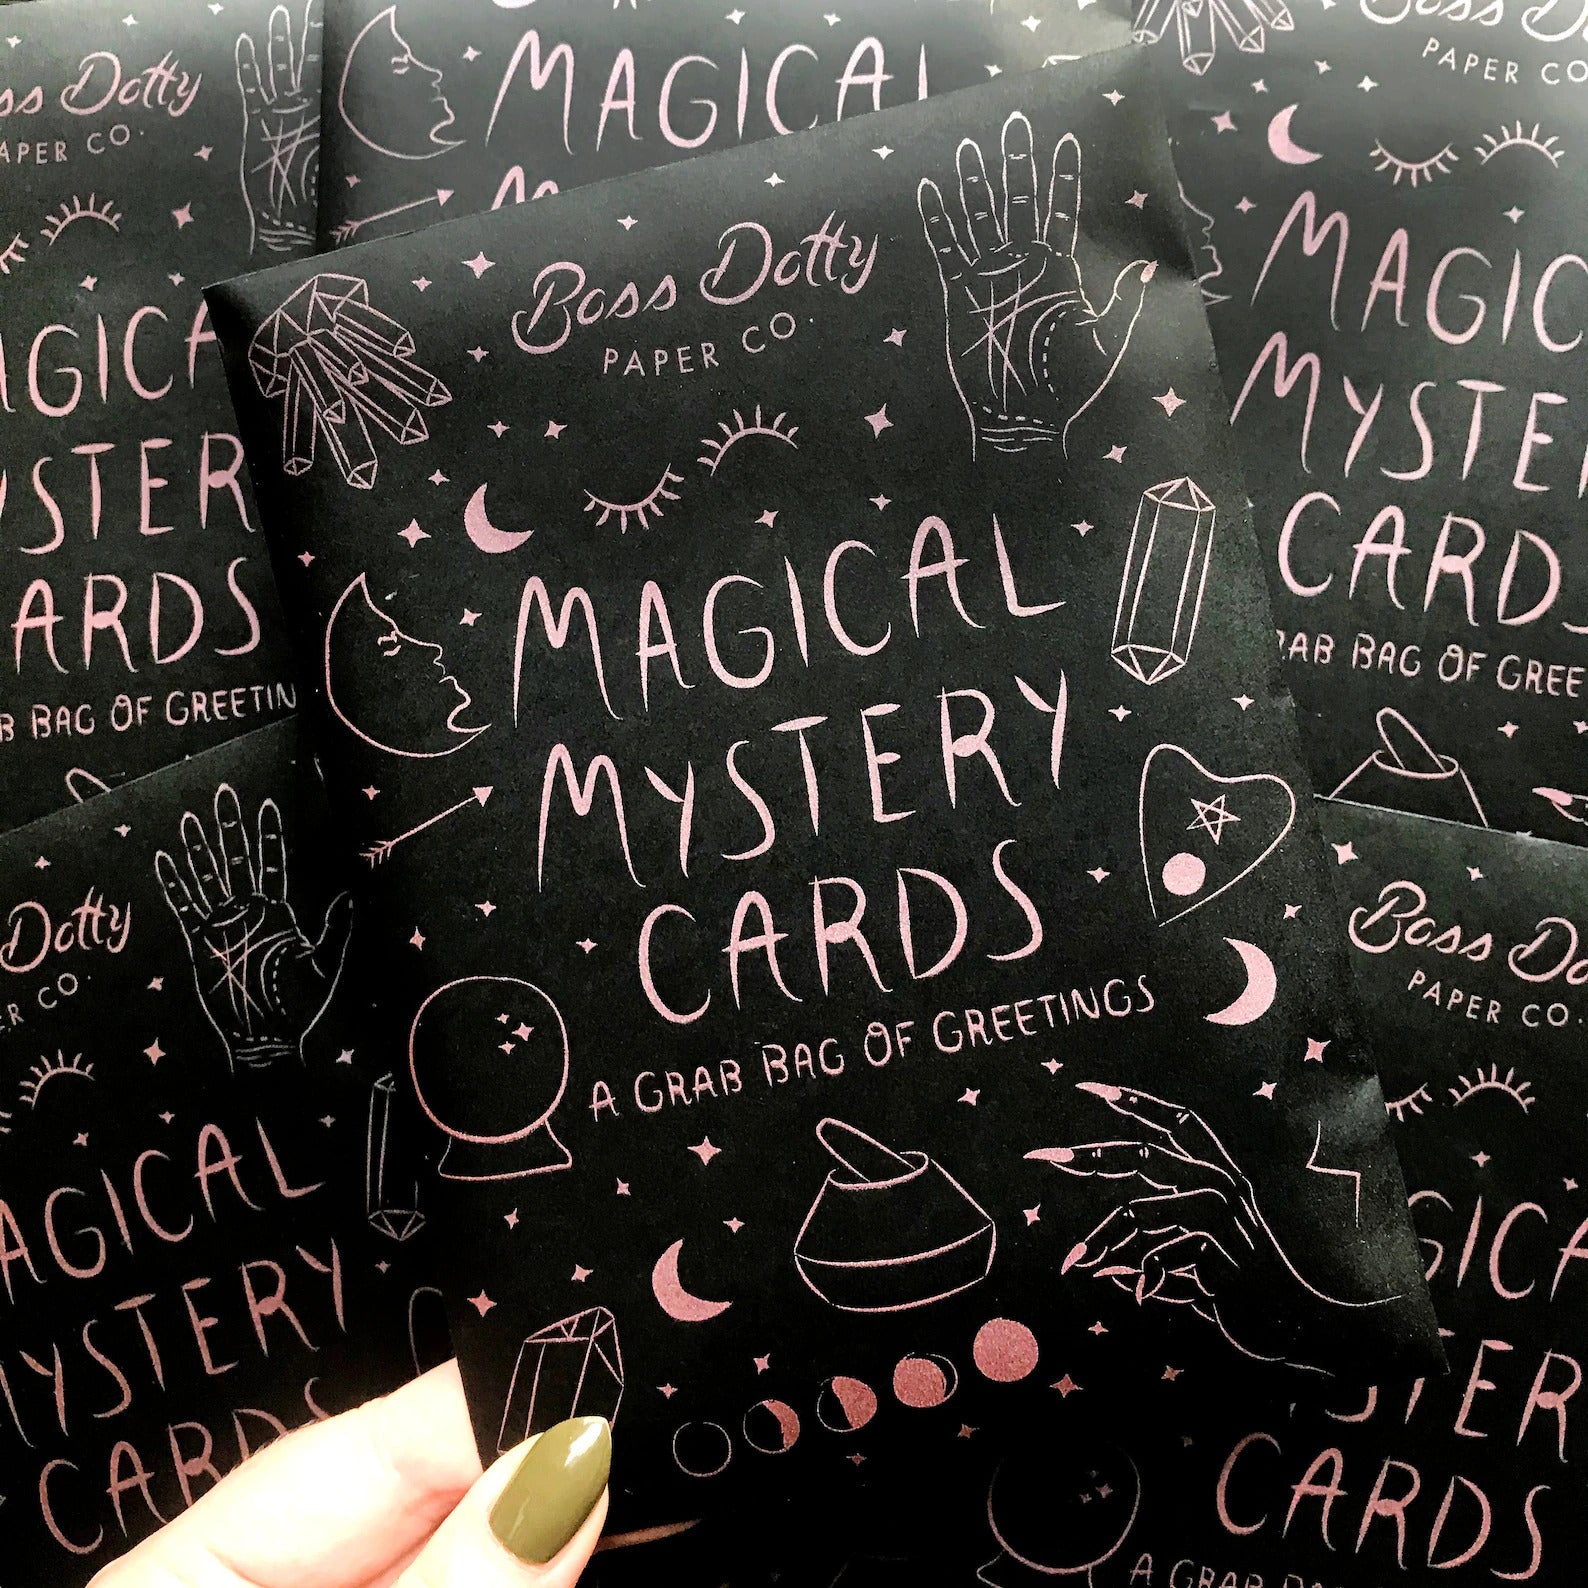 Painting magic with a Black Paper Journal 